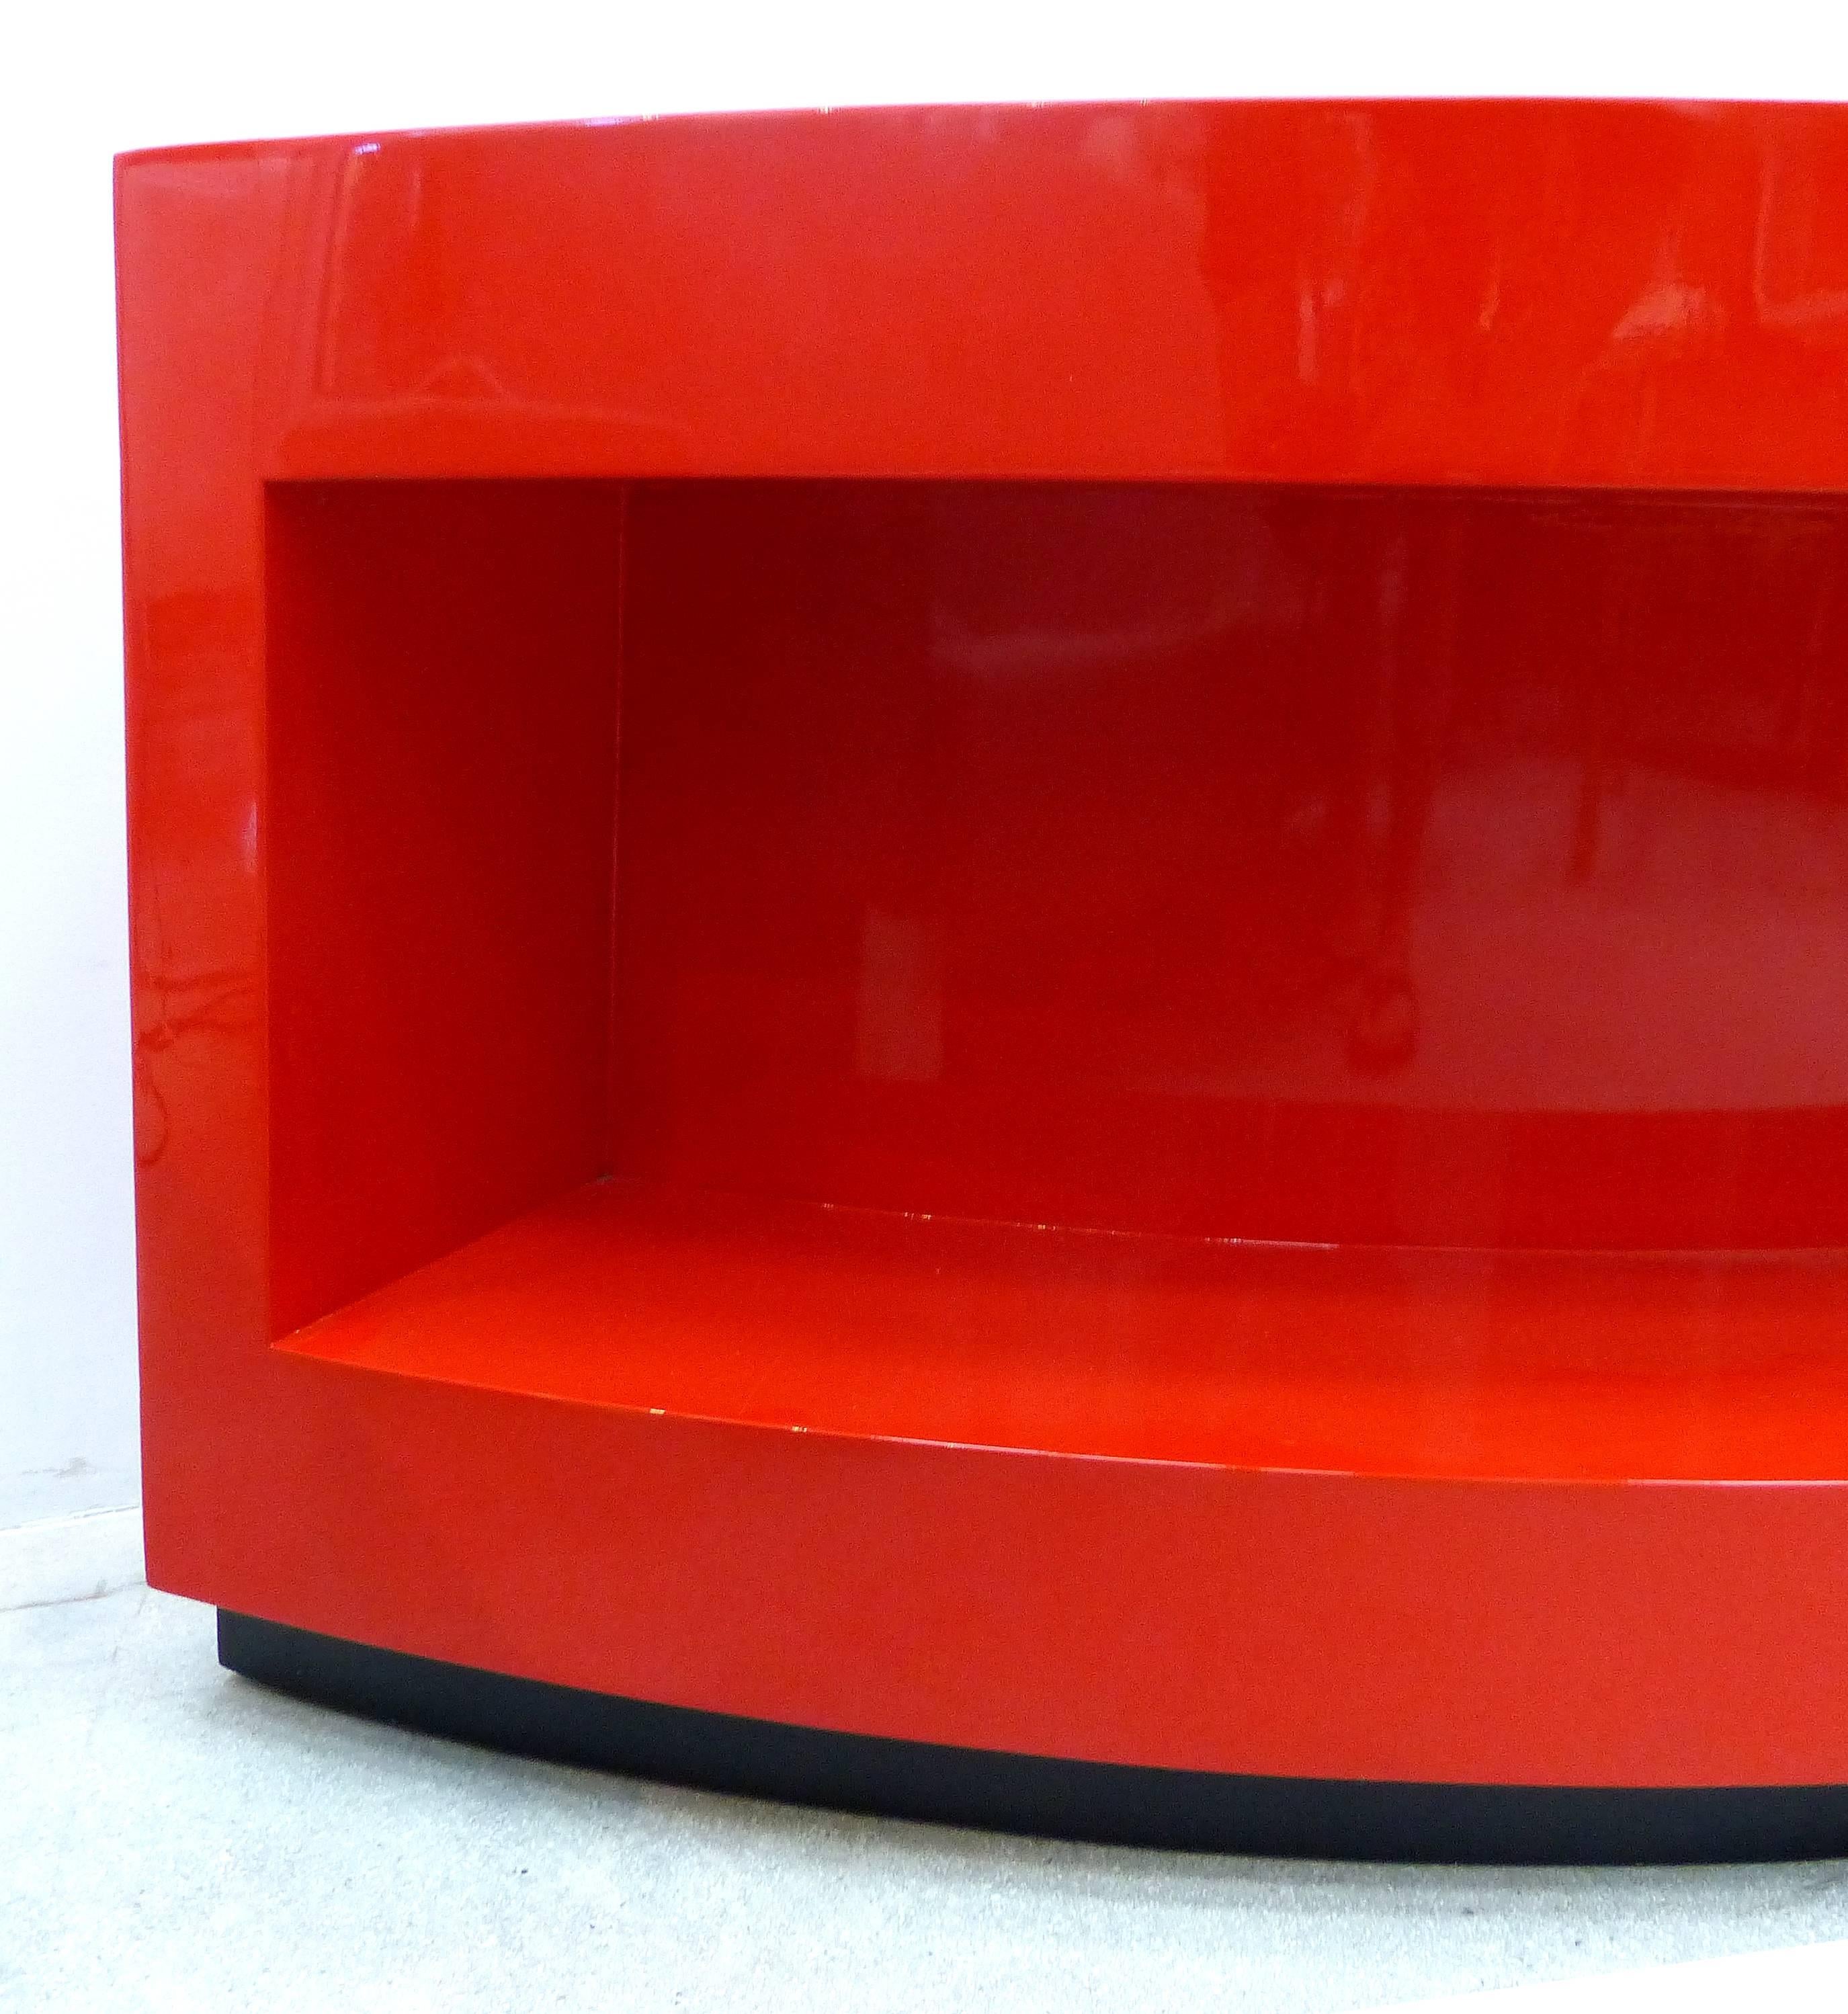 Mid-20th Century Art Deco Curved Red Lacquer Bookcase by Paul Laszlo